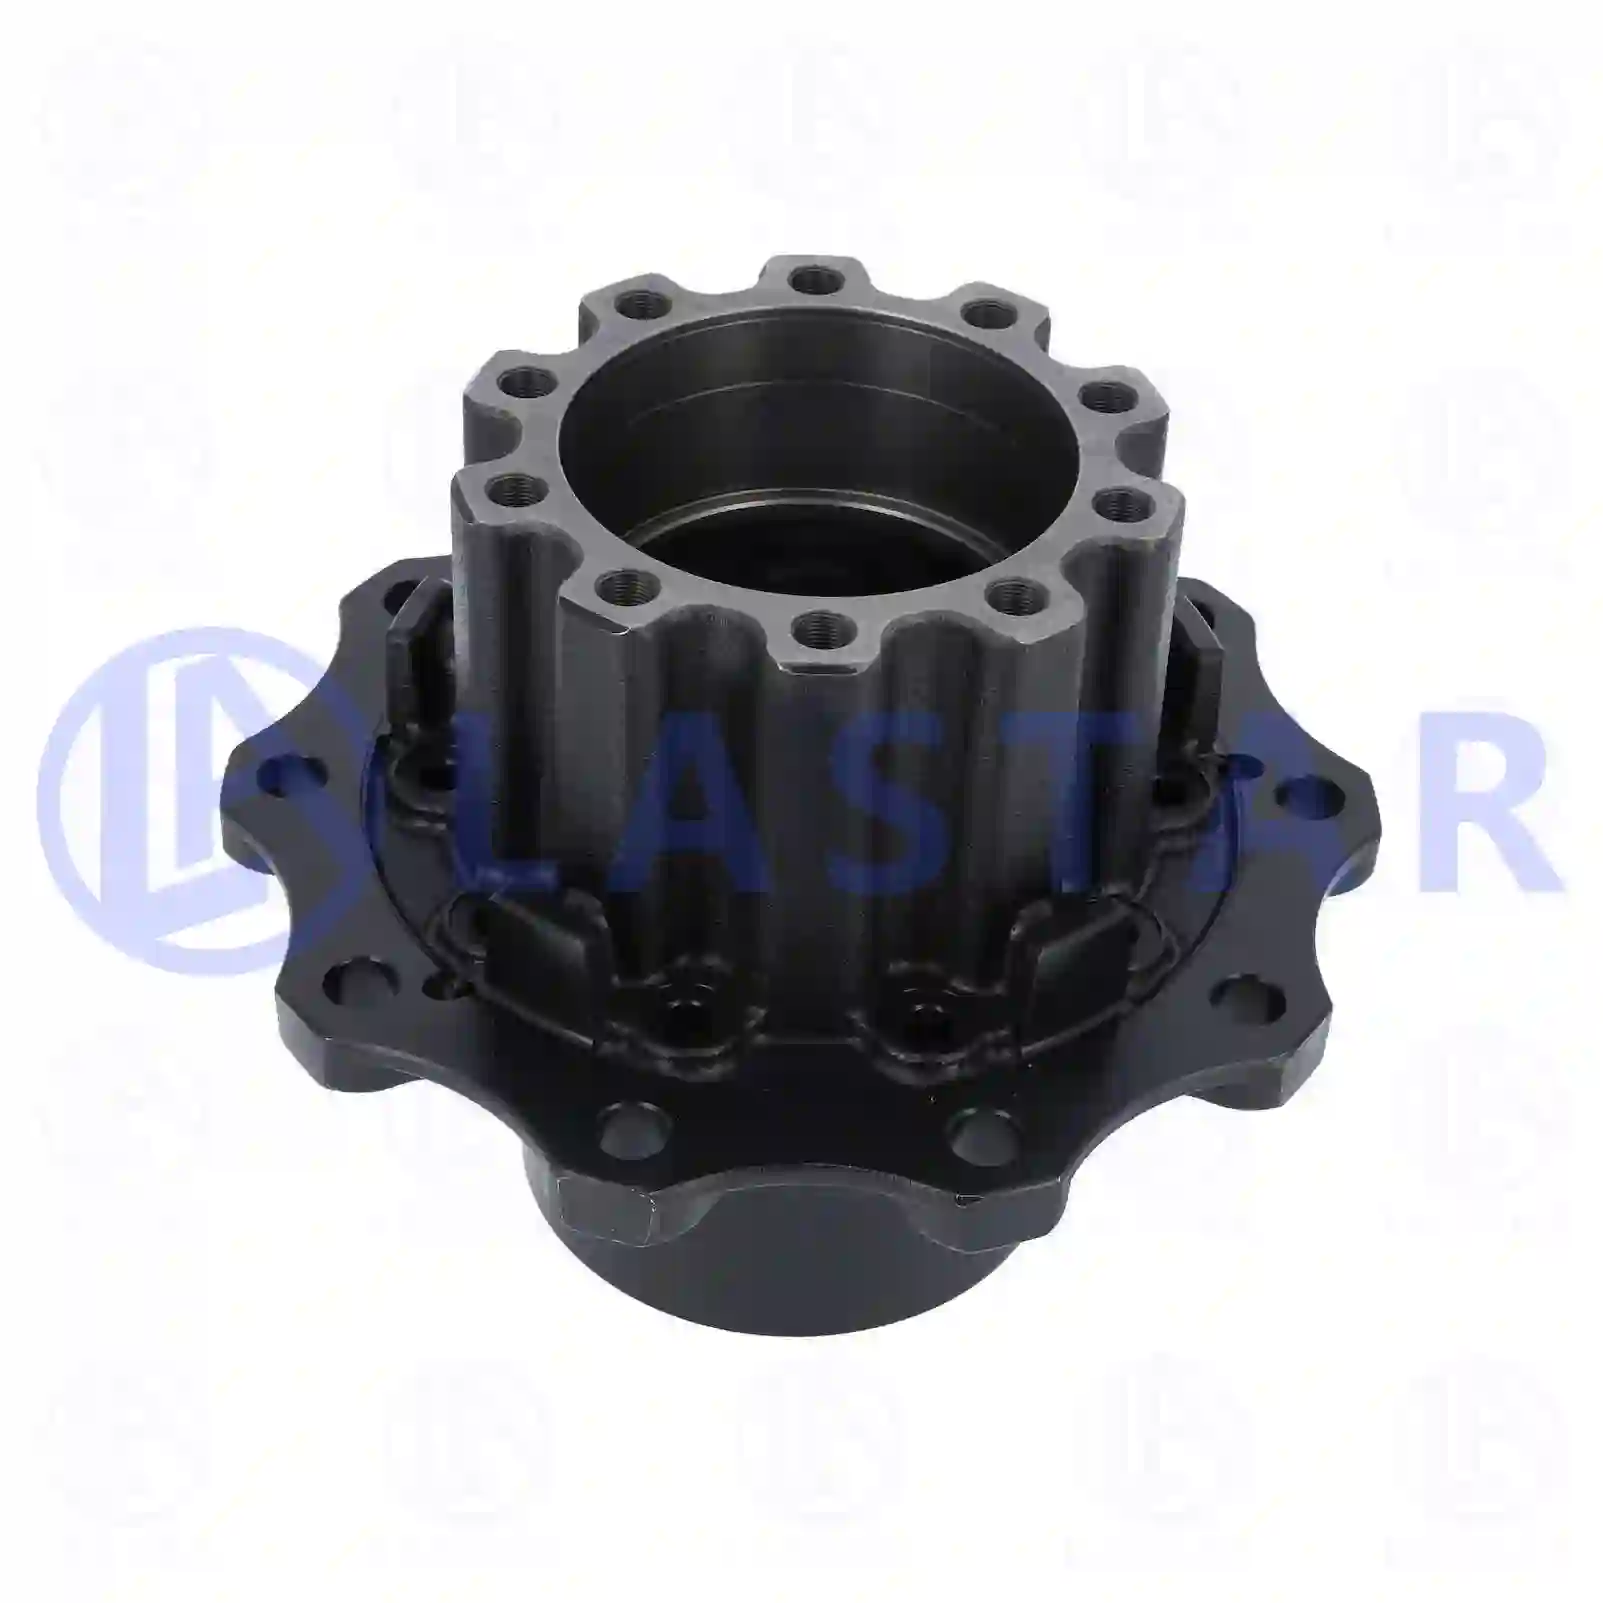 Wheel hub, without bearings, 77726336, 4003560201, 9463560201, 9603561801, ZG30229-0008, , , ||  77726336 Lastar Spare Part | Truck Spare Parts, Auotomotive Spare Parts Wheel hub, without bearings, 77726336, 4003560201, 9463560201, 9603561801, ZG30229-0008, , , ||  77726336 Lastar Spare Part | Truck Spare Parts, Auotomotive Spare Parts